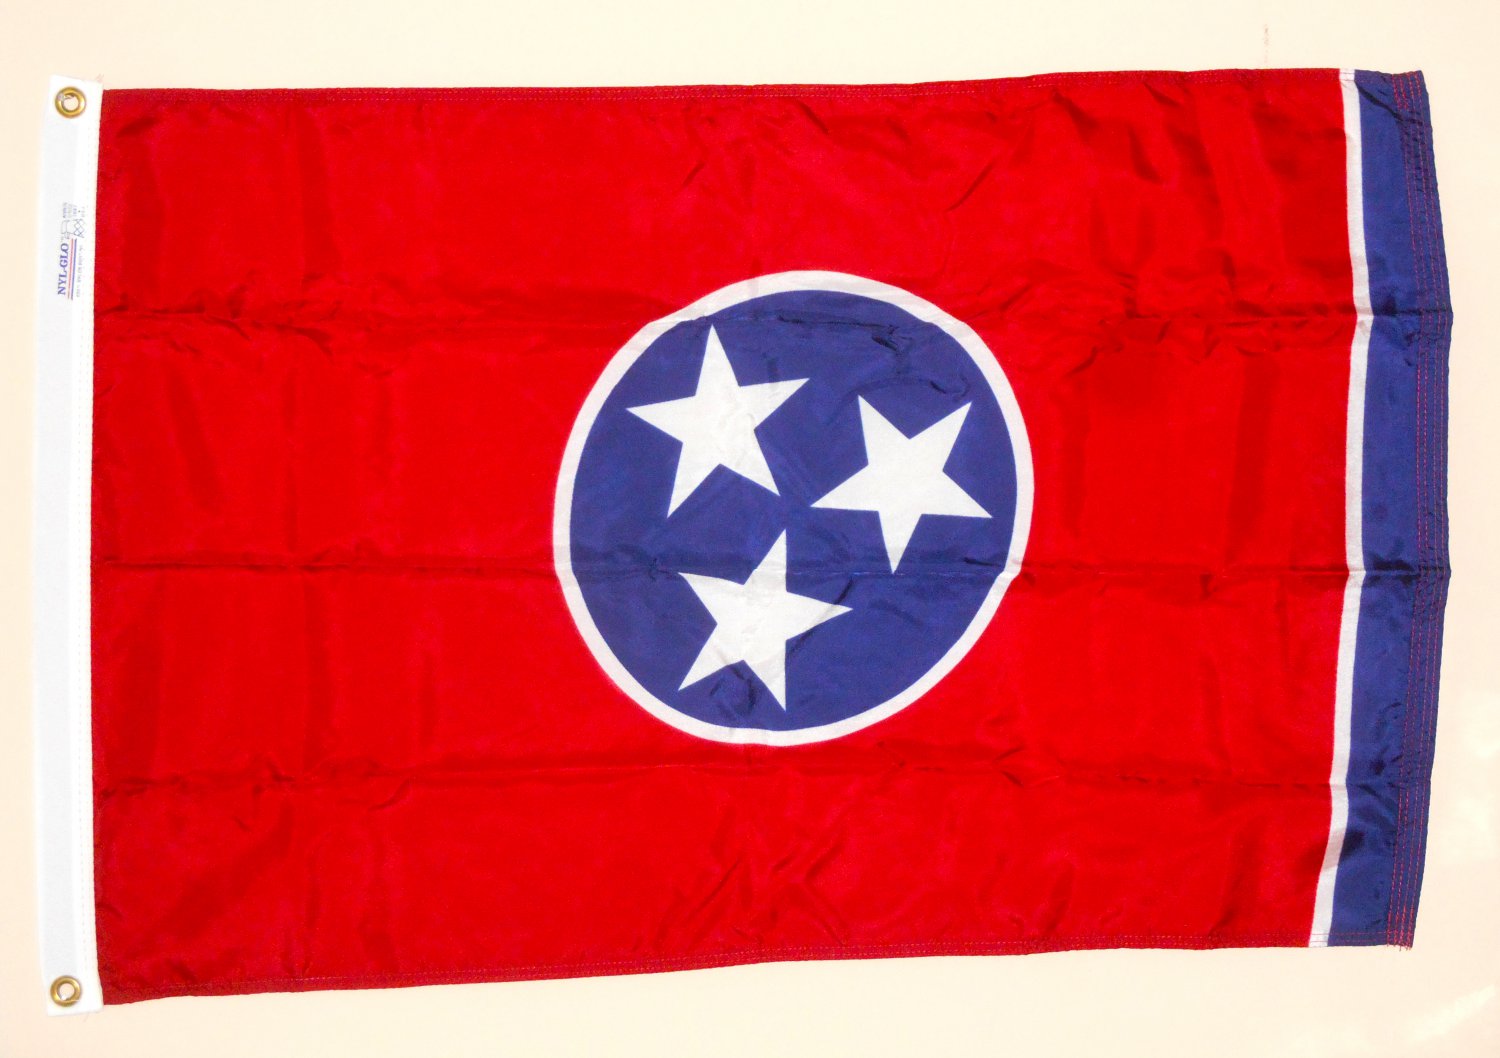 Tennessee State Flag 2' x 3' NYL-GLO Annin 145150 Nylon Bunting Brass Grommets Canvas Header USA